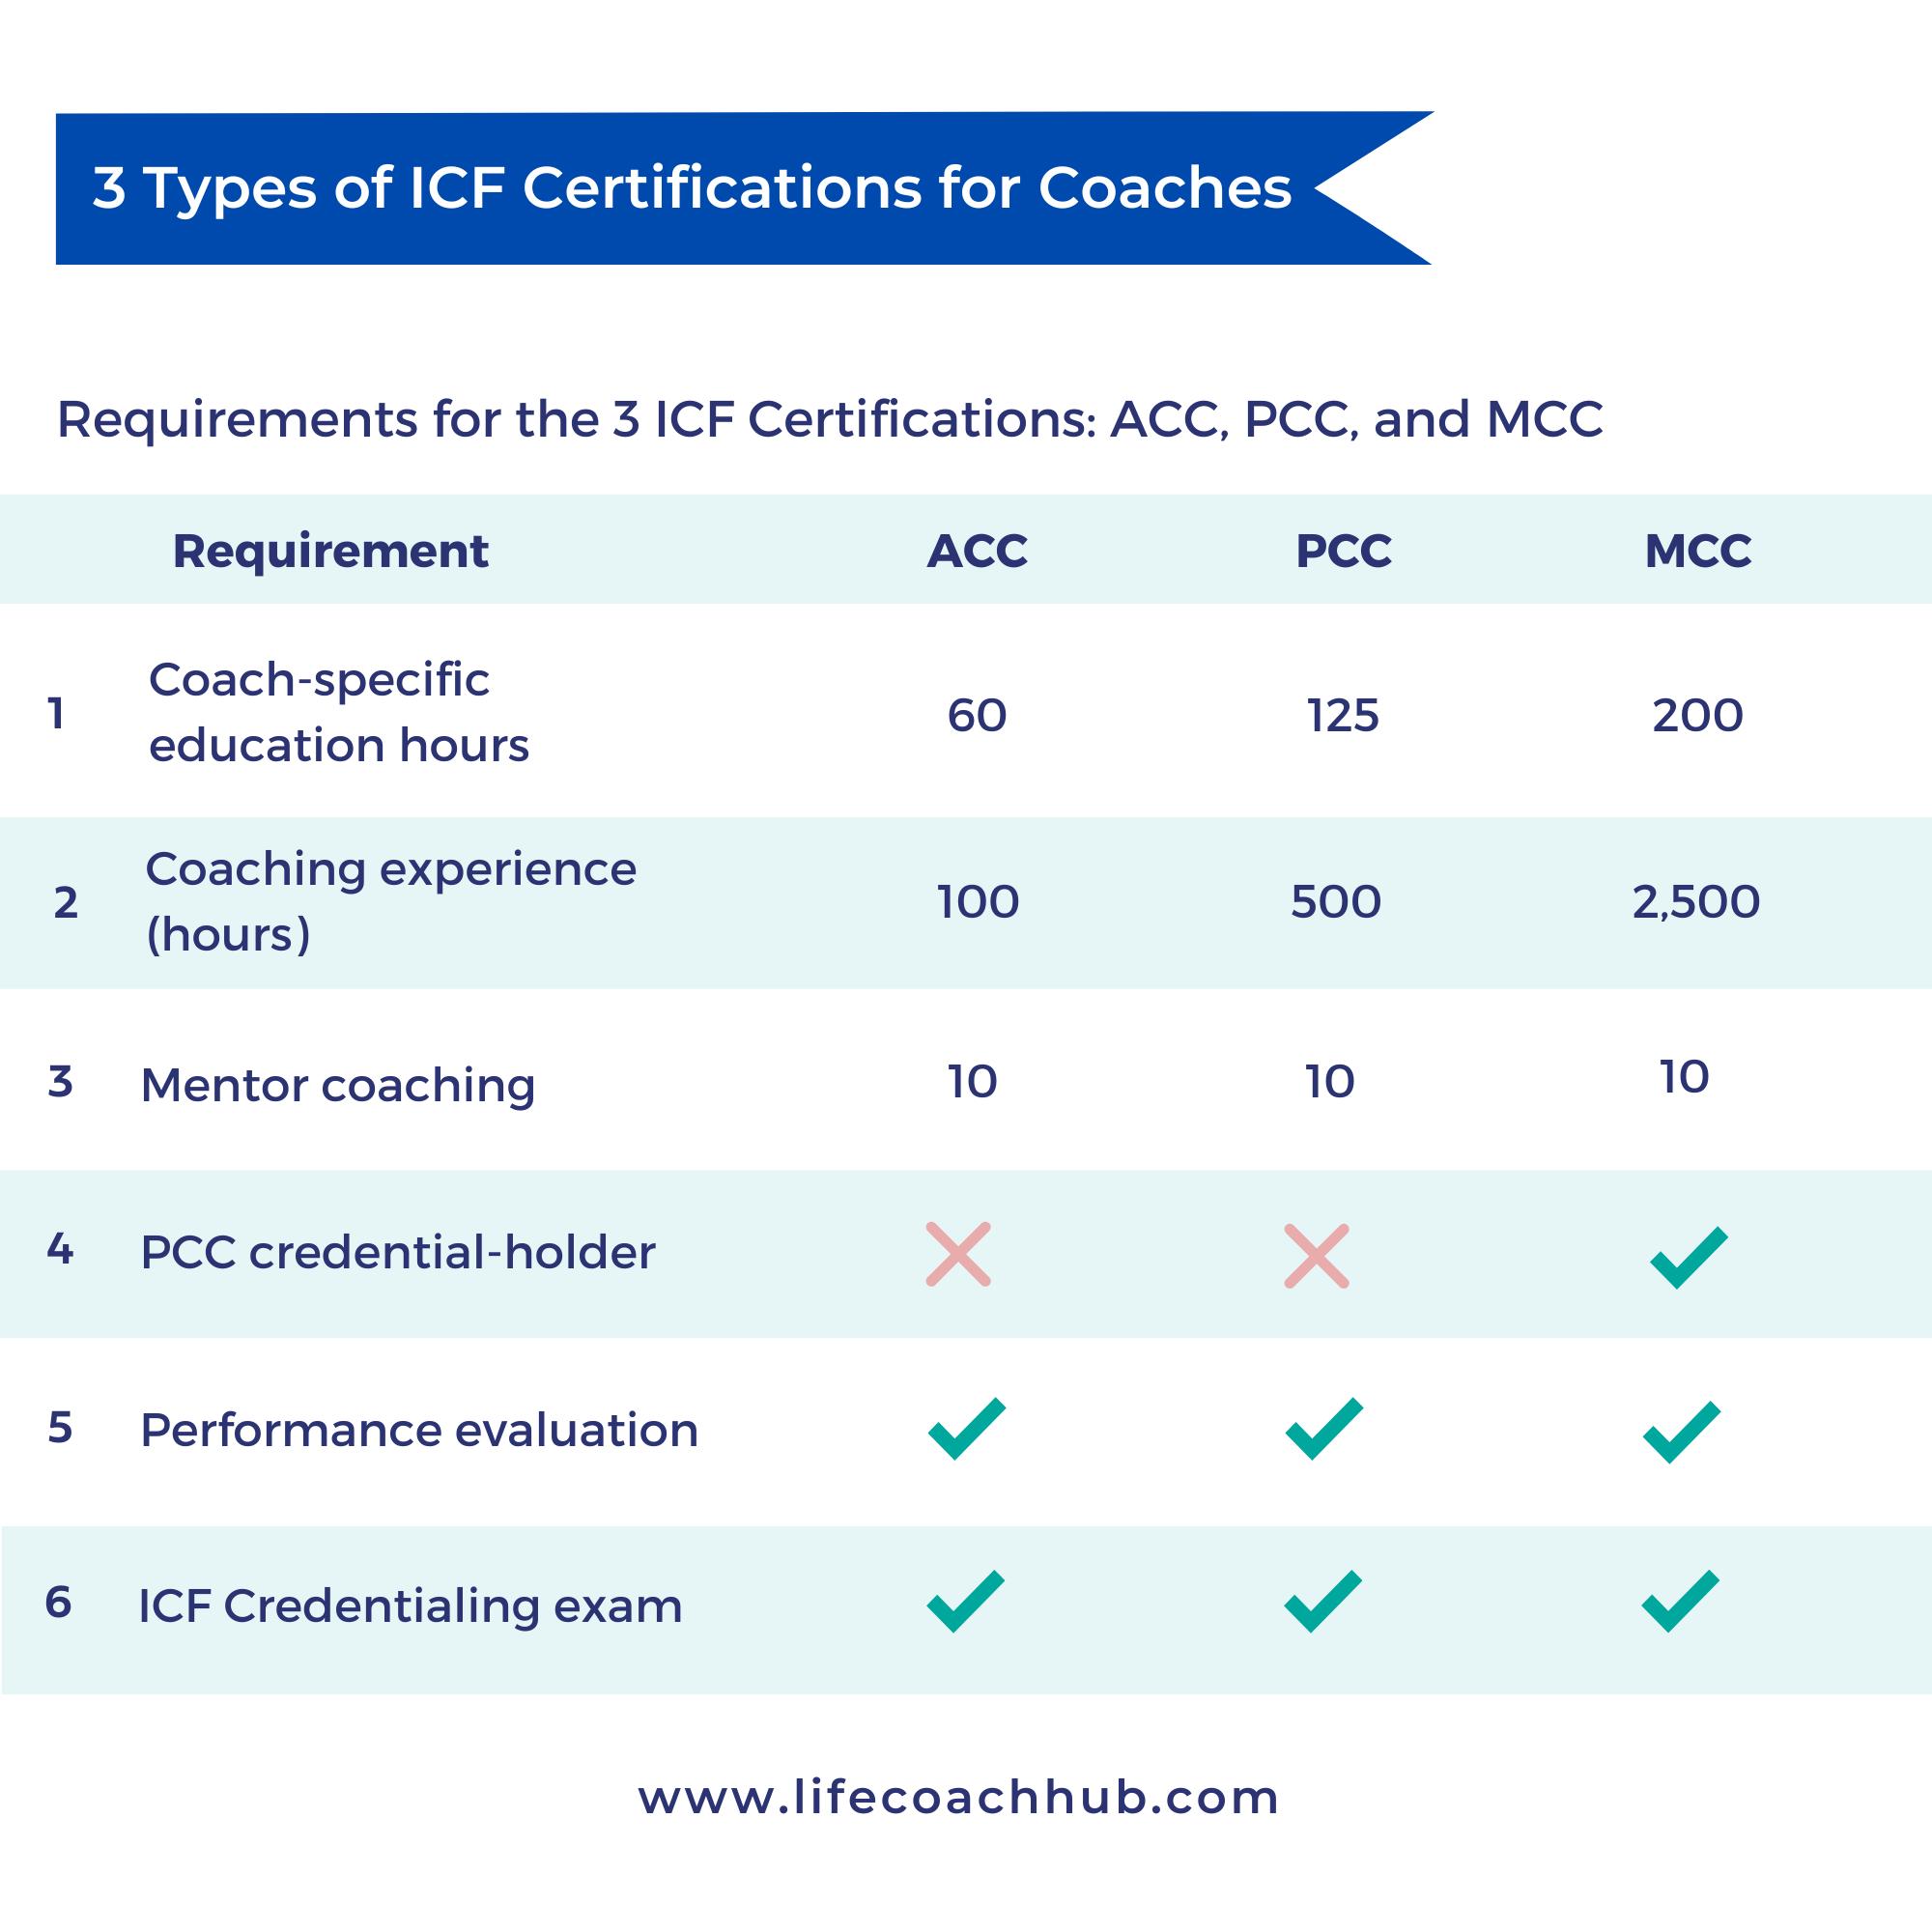 Know the different requirements for the 3 ICF Certifications: ACC, PCC, MCC